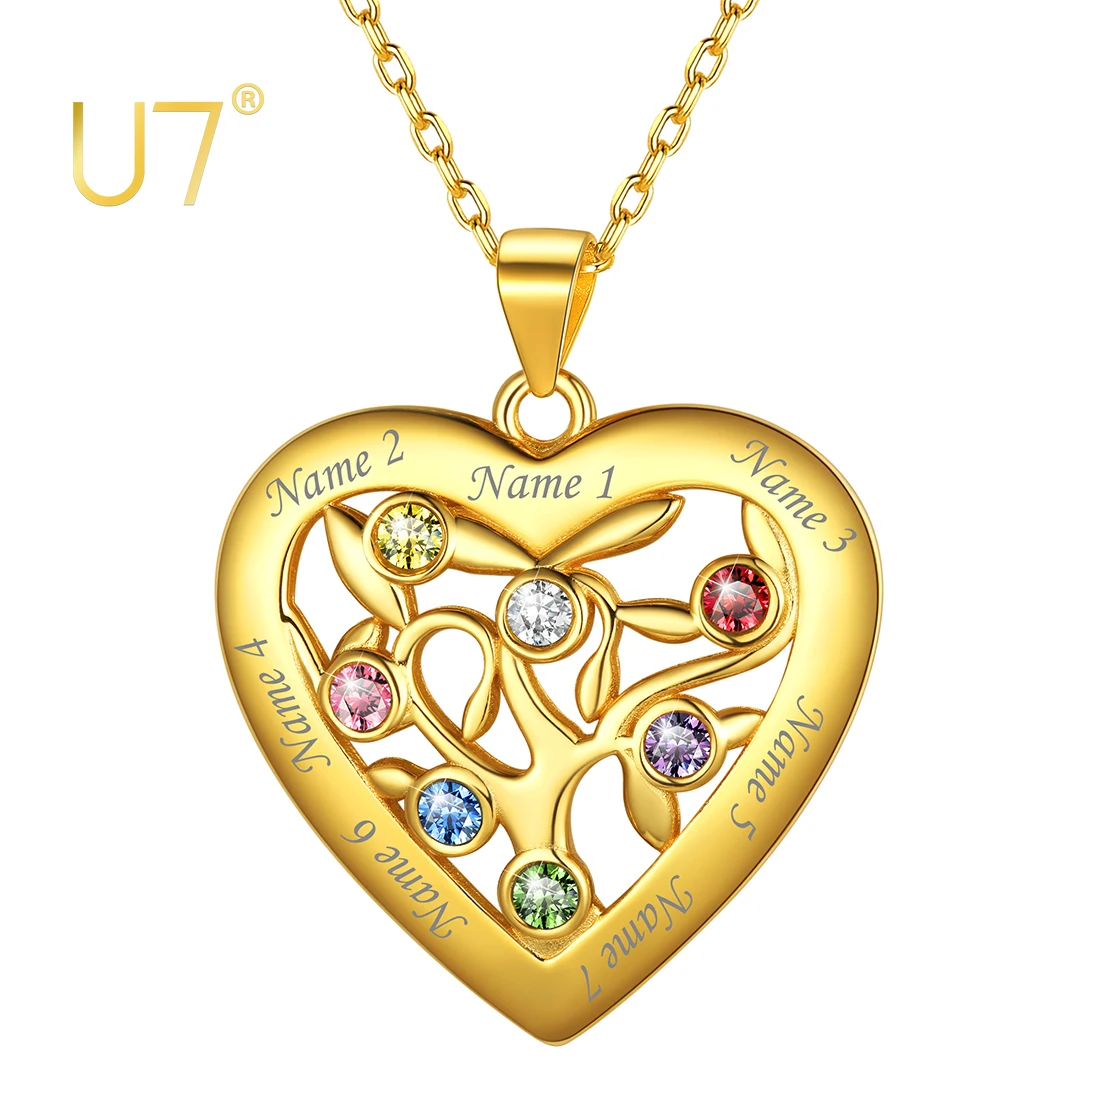 

U7 Tree of Life Necklace Heart Shape 925 Sterling Silver Jewelry Pendant 2-7 Names Engraved Birthstones Family Friend Gifts